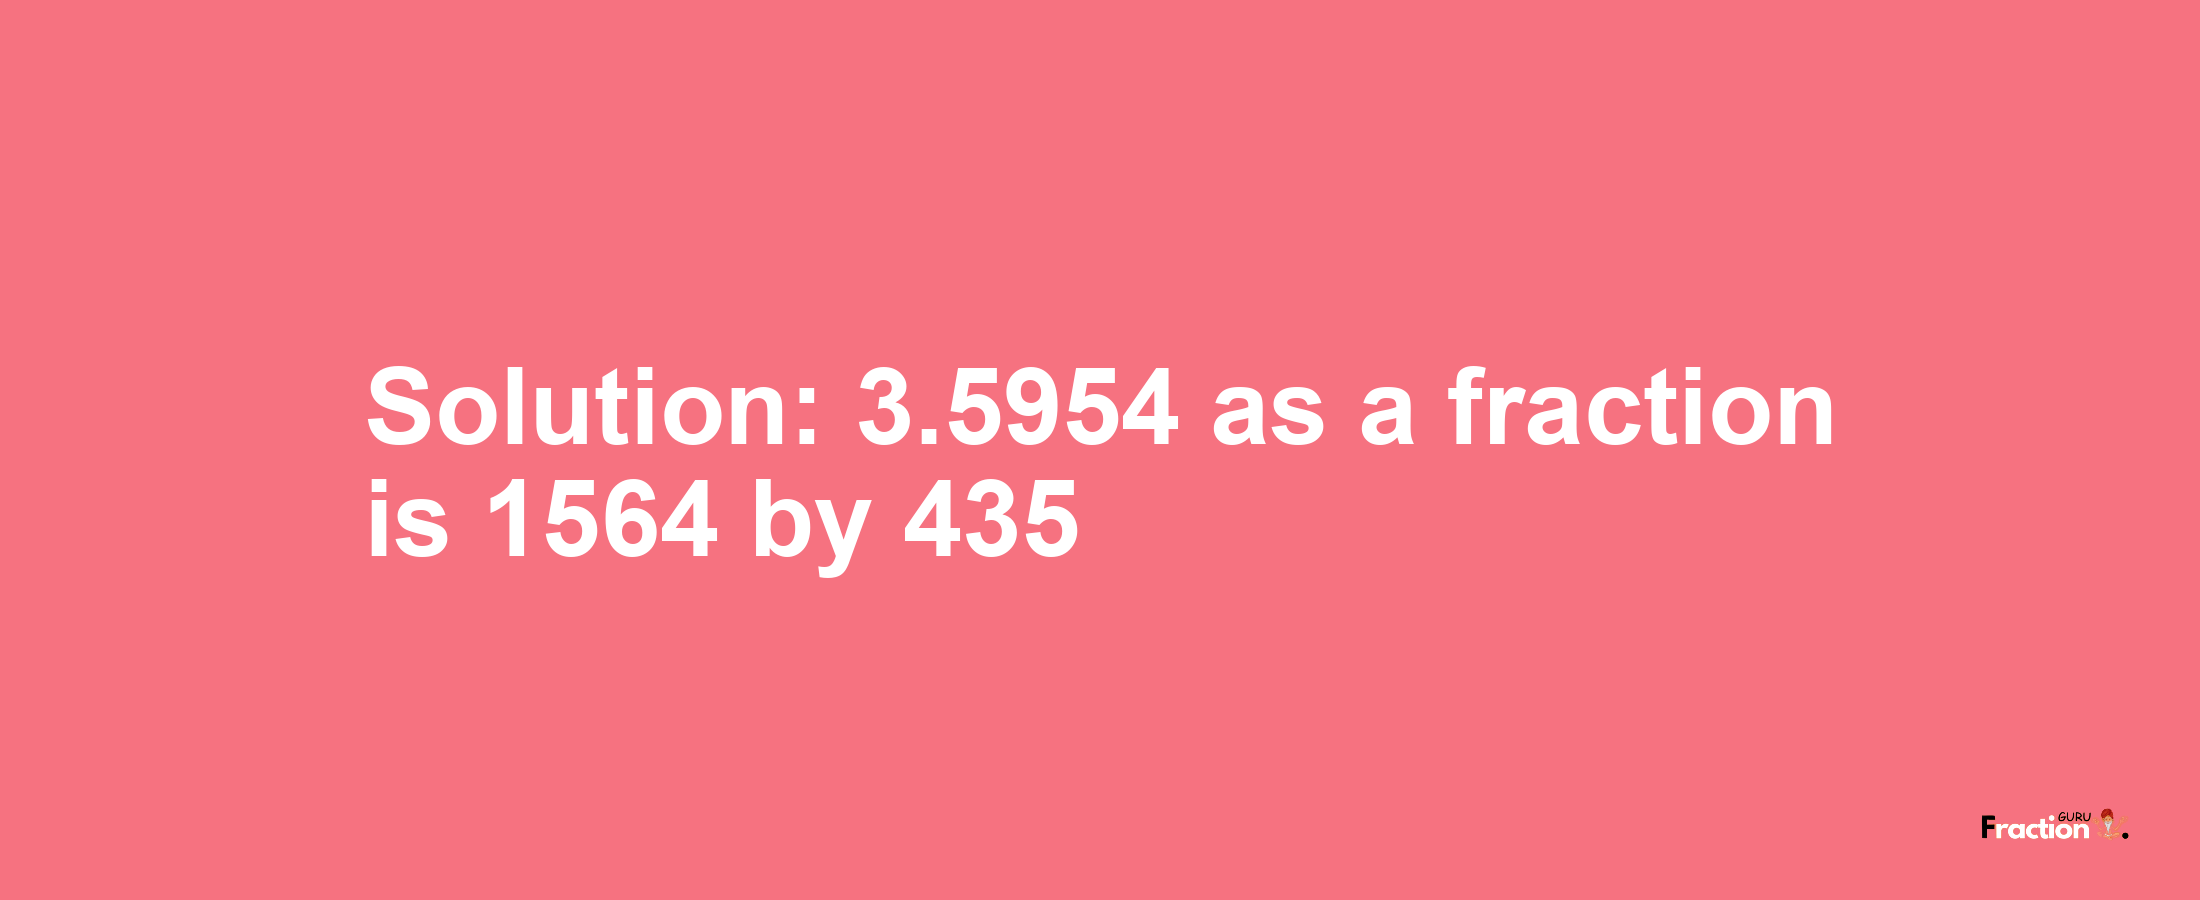 Solution:3.5954 as a fraction is 1564/435